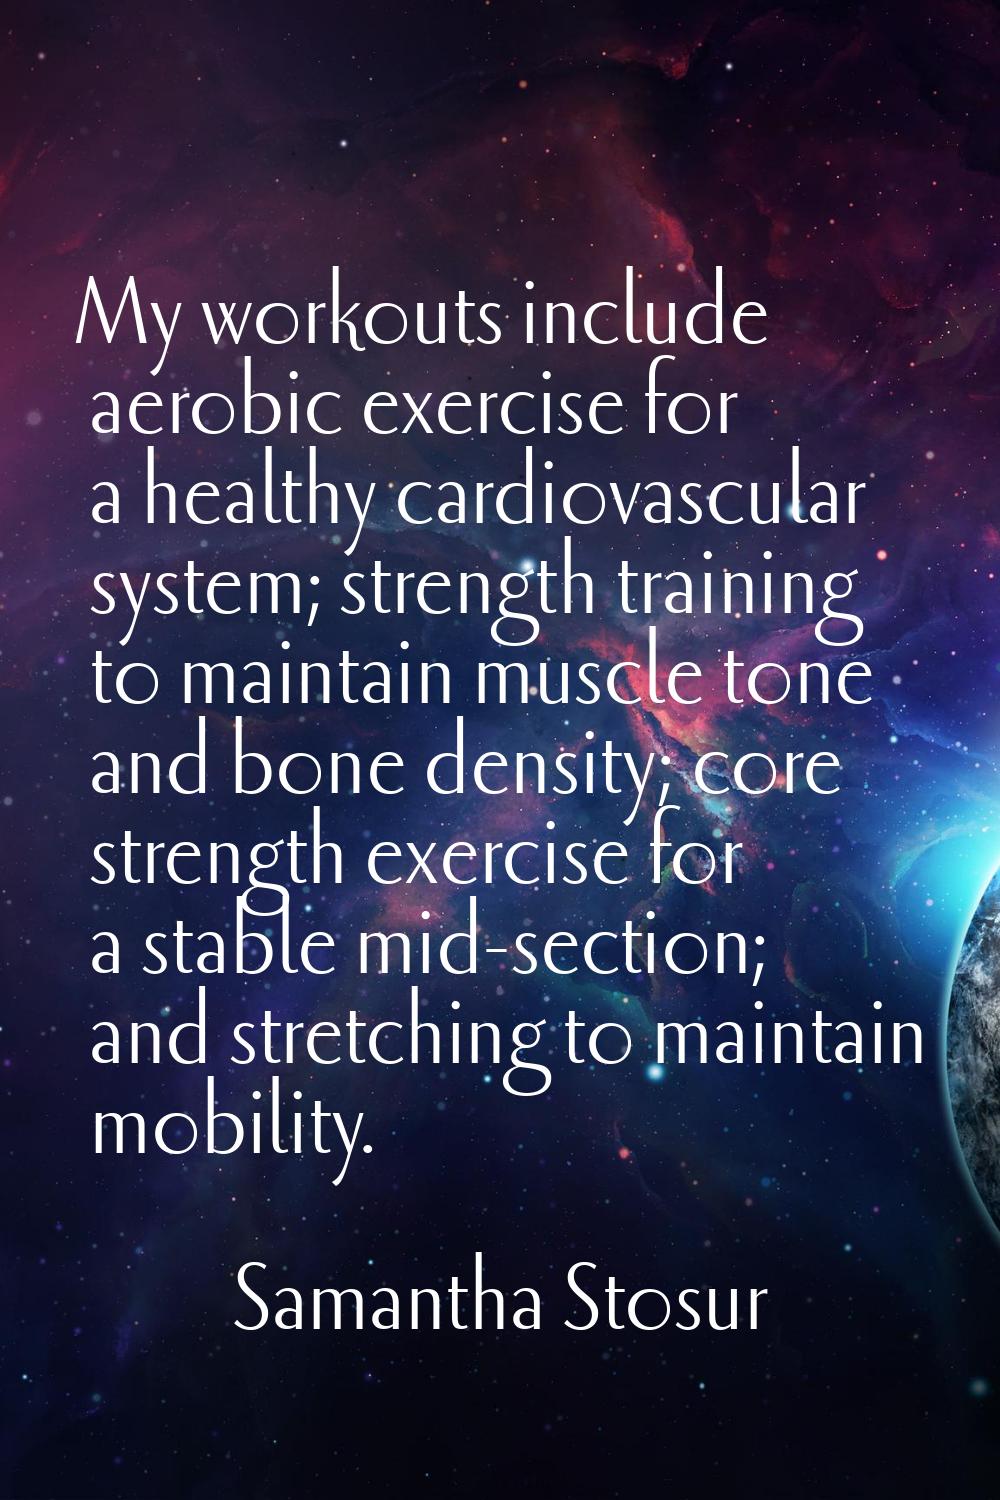 My workouts include aerobic exercise for a healthy cardiovascular system; strength training to main